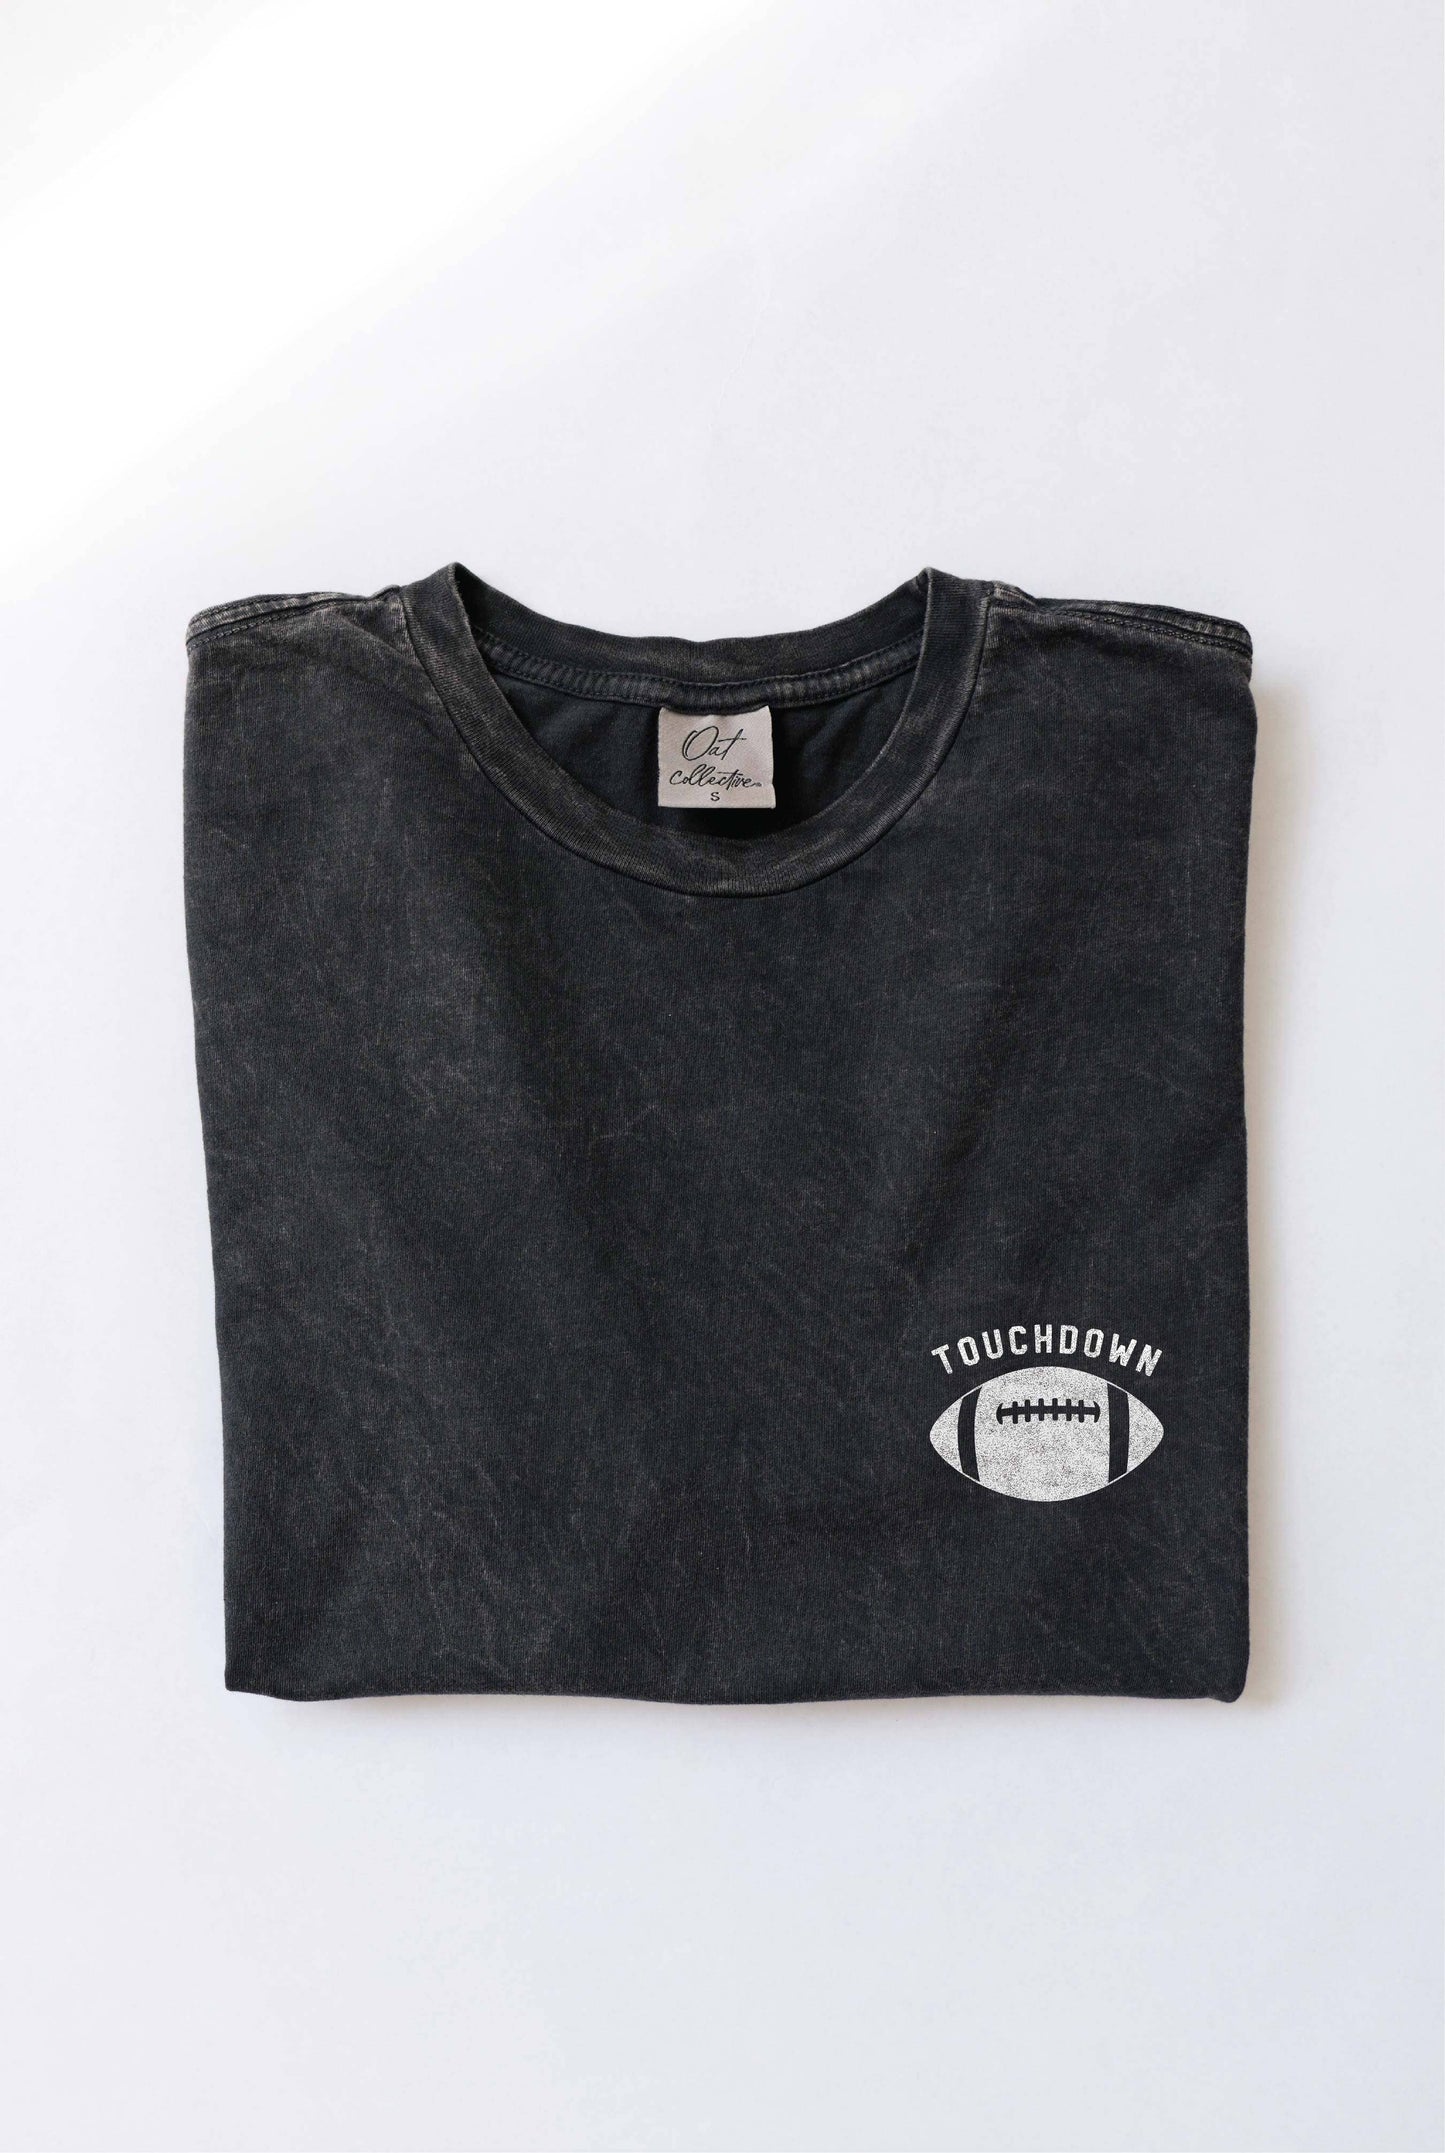 Touchdown Front and Game Day back Mineral Washed Graphic Top